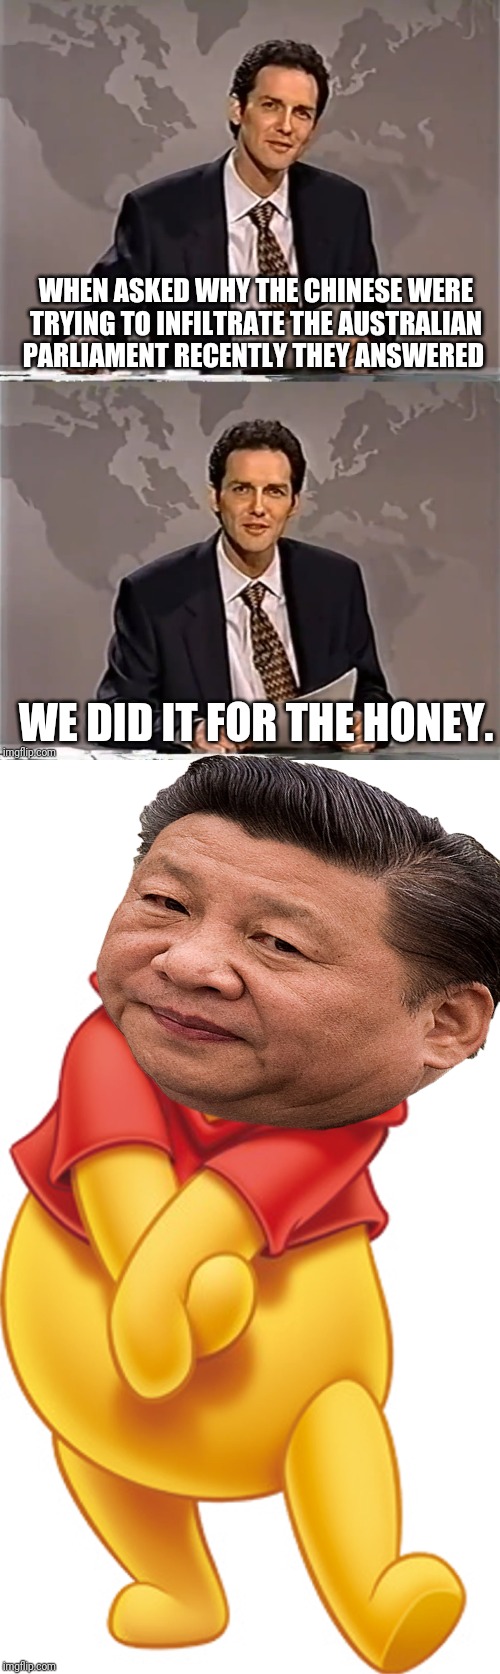 WHEN ASKED WHY THE CHINESE WERE TRYING TO INFILTRATE THE AUSTRALIAN PARLIAMENT RECENTLY THEY ANSWERED; WE DID IT FOR THE HONEY. | image tagged in weekend update with norm,china,china is ashole,political meme | made w/ Imgflip meme maker